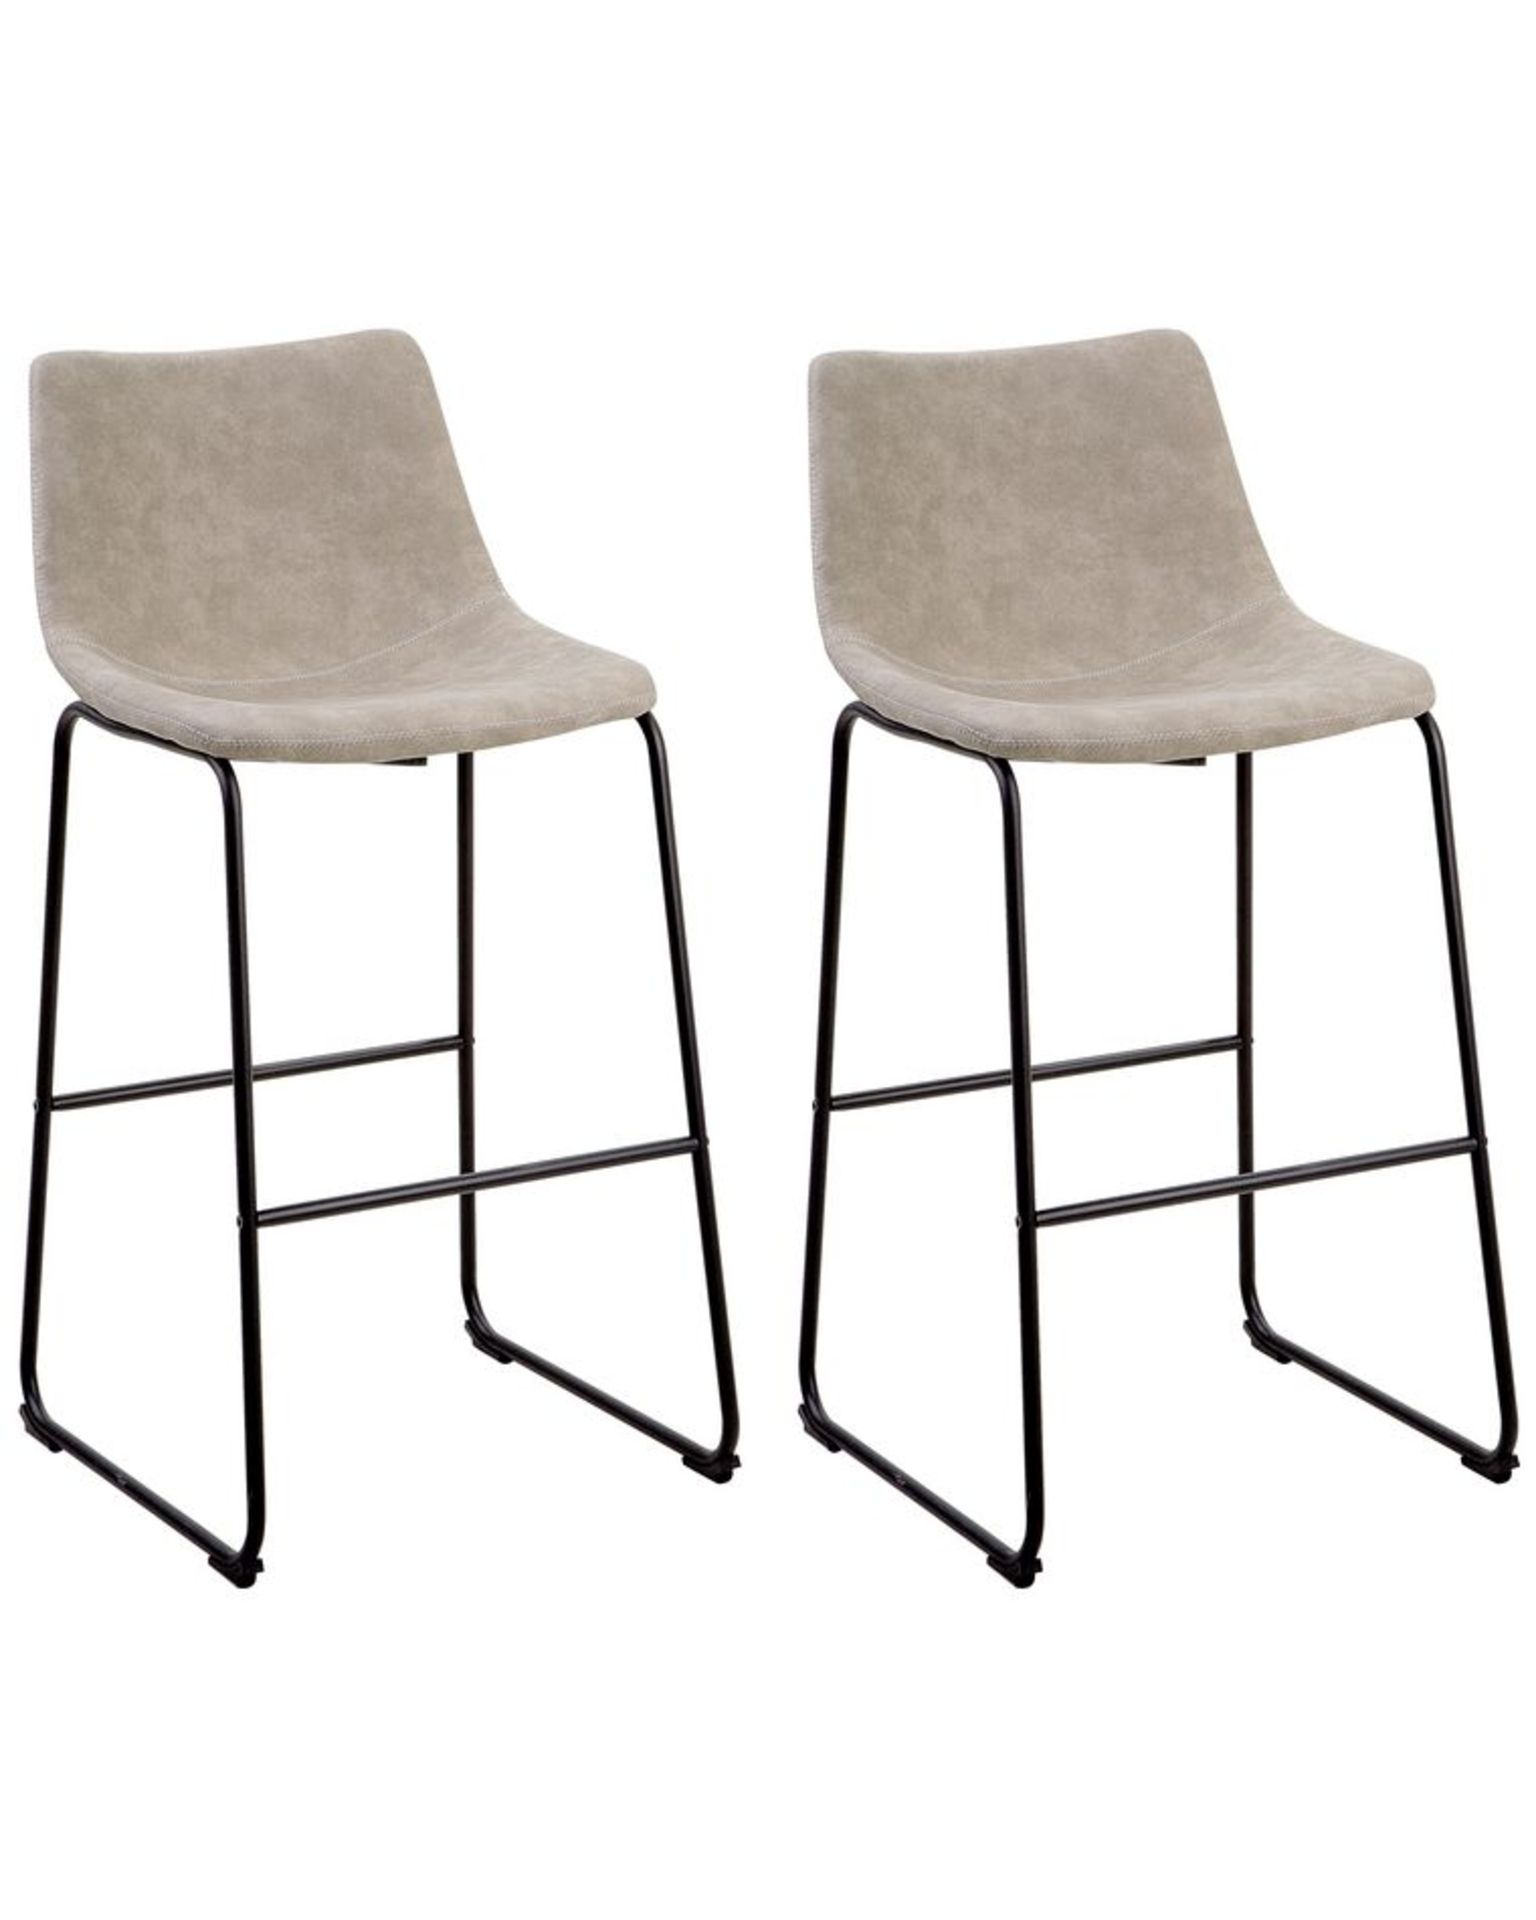 Franks Set of 2 Fabric Bar Chairs Beige. - R13a.8. RRP £219.99. Incorporate mid-century charm into